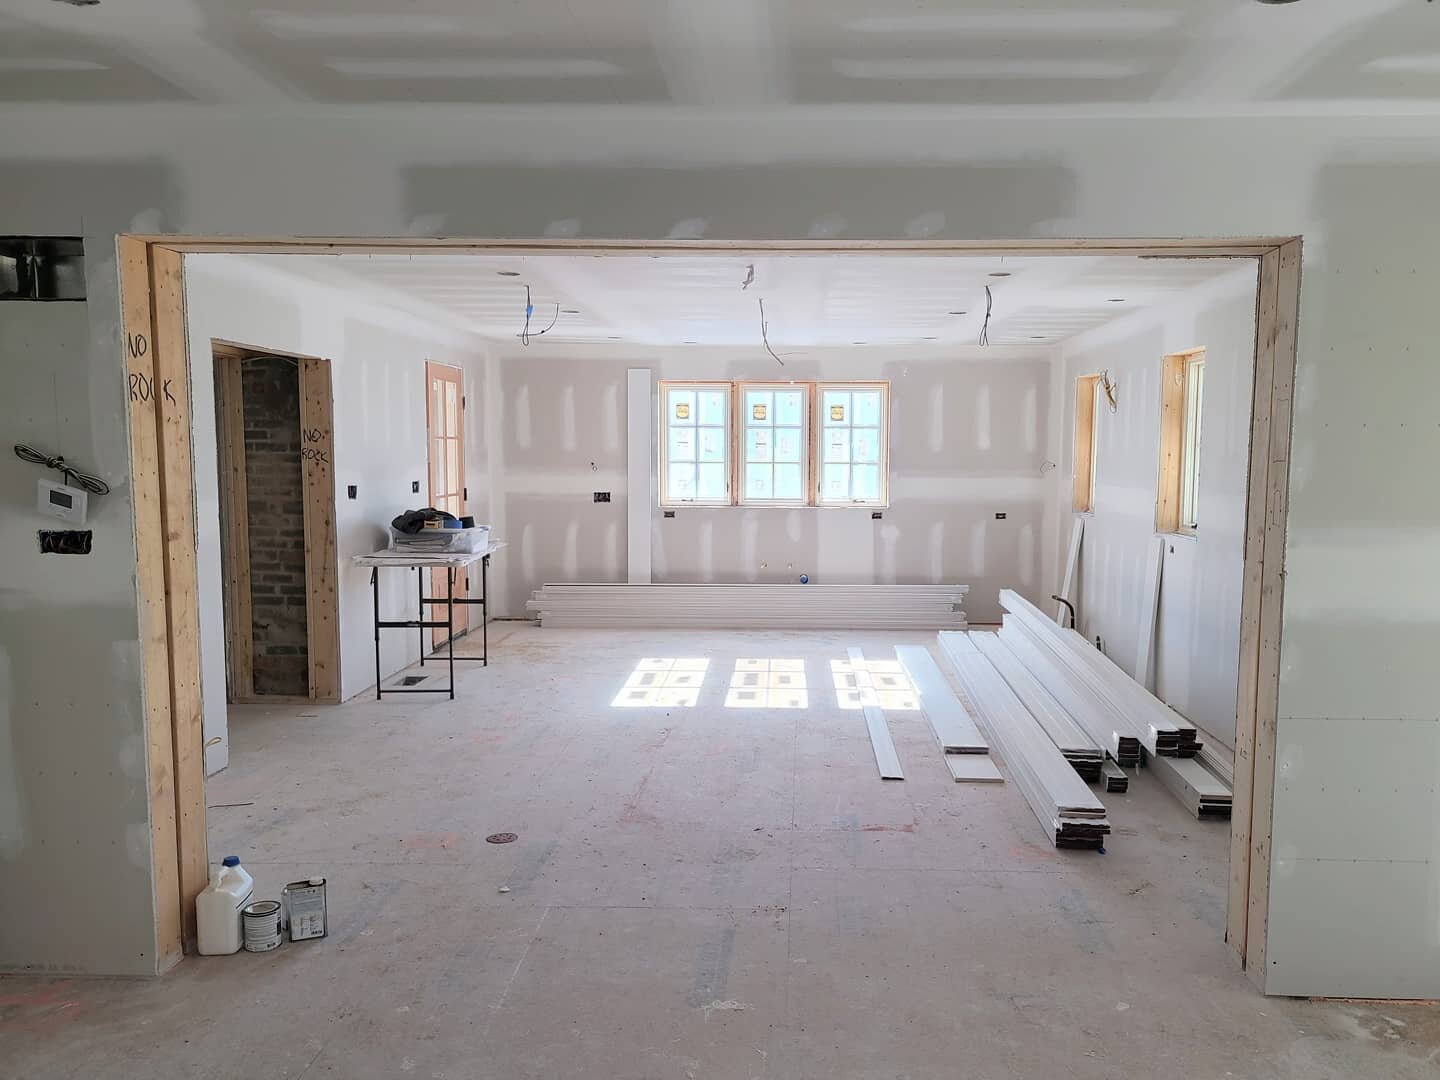 Soon. Very soon. This empty space will be a lovely new custom kitchen from @christianacabinetry @christianafactorystudio with amazing country views one direction and cozy fireplace vibes the other. Stay tuned...
.
.
.
.
.
.
.
#customcabinetry #contem